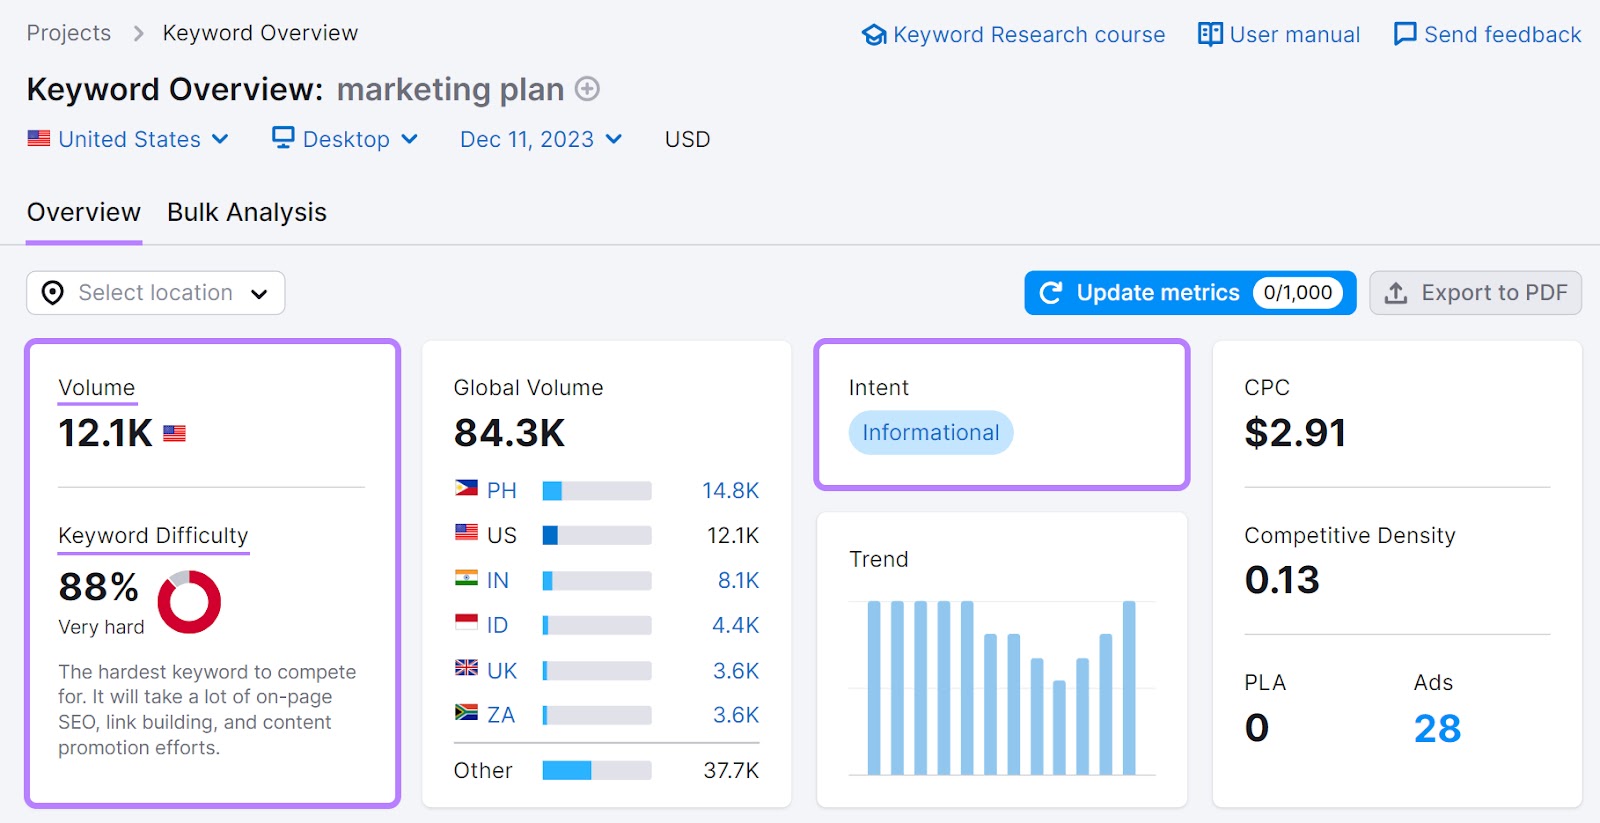 Keyword Overview dashboard for "marketing plan"